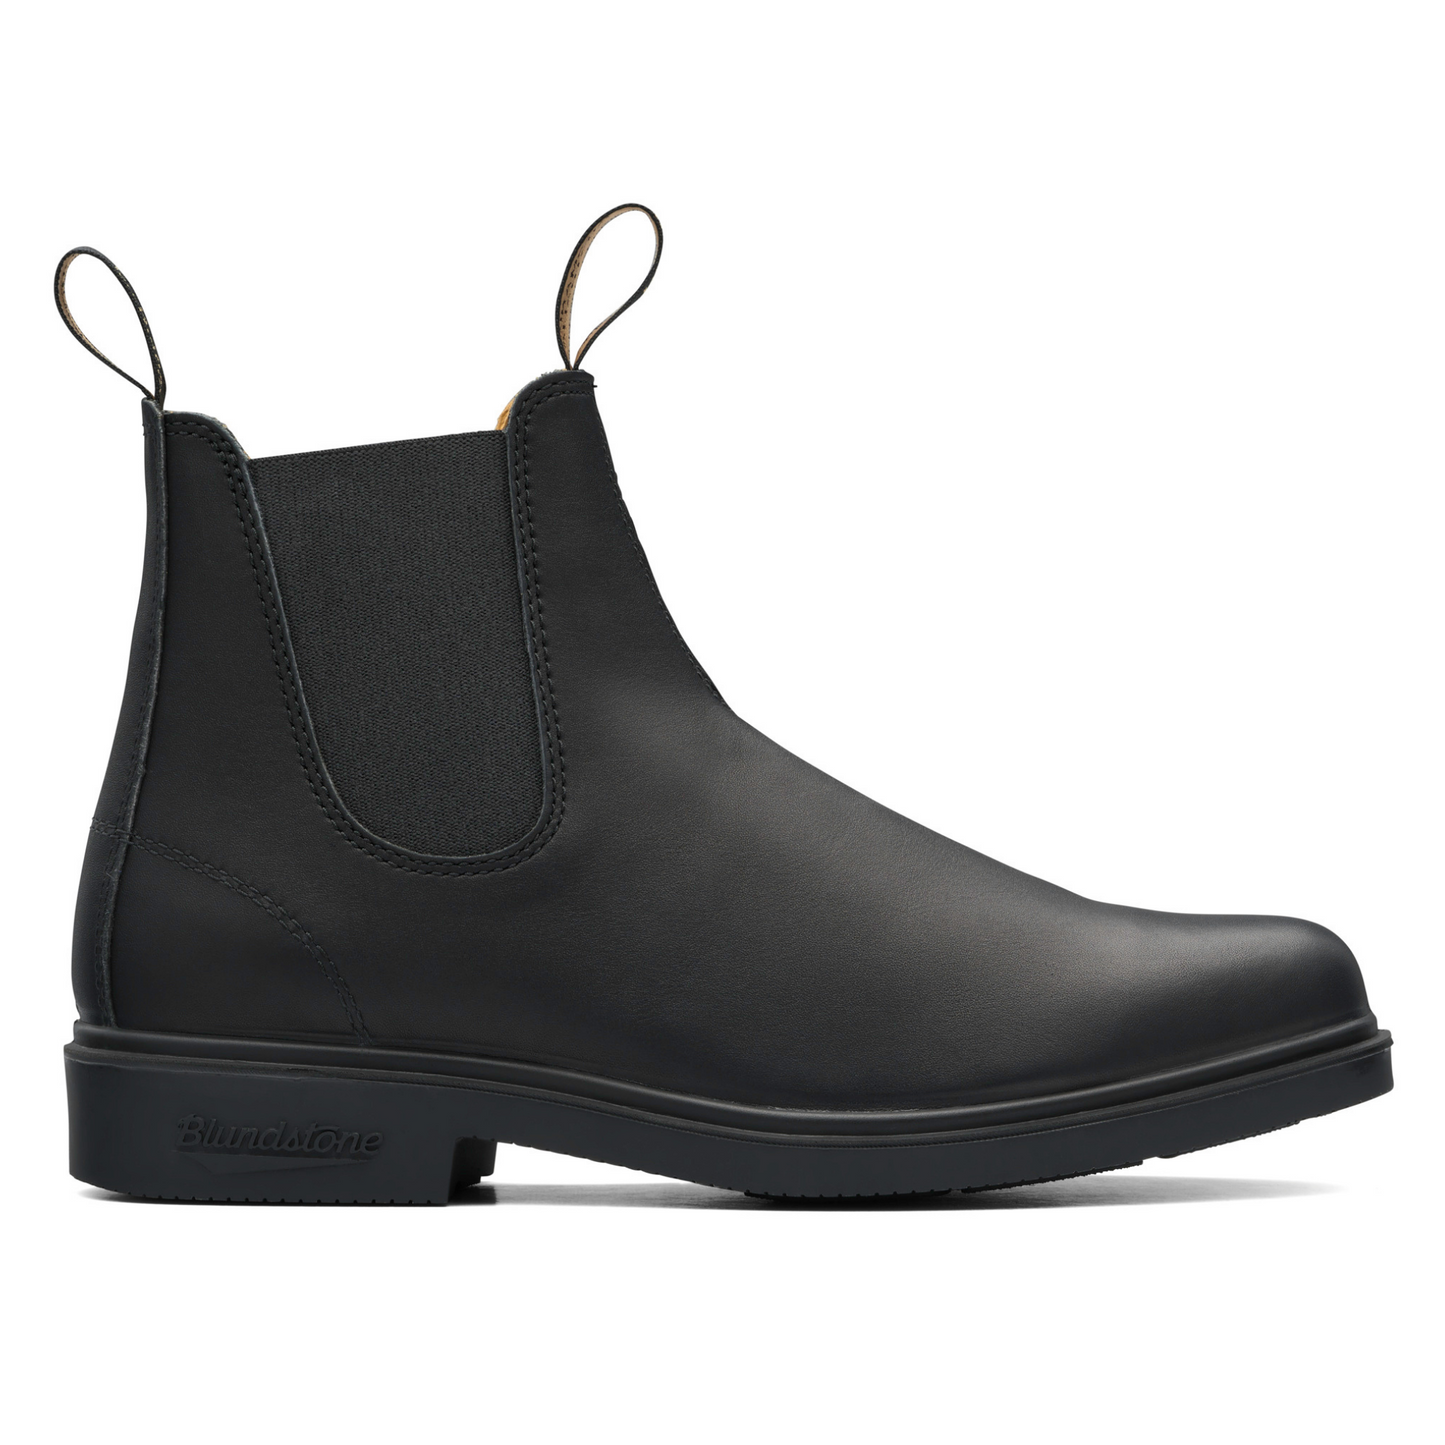 Side profile of the right boot. Low heel, black leather, over-the-ankle height with elastic sides.